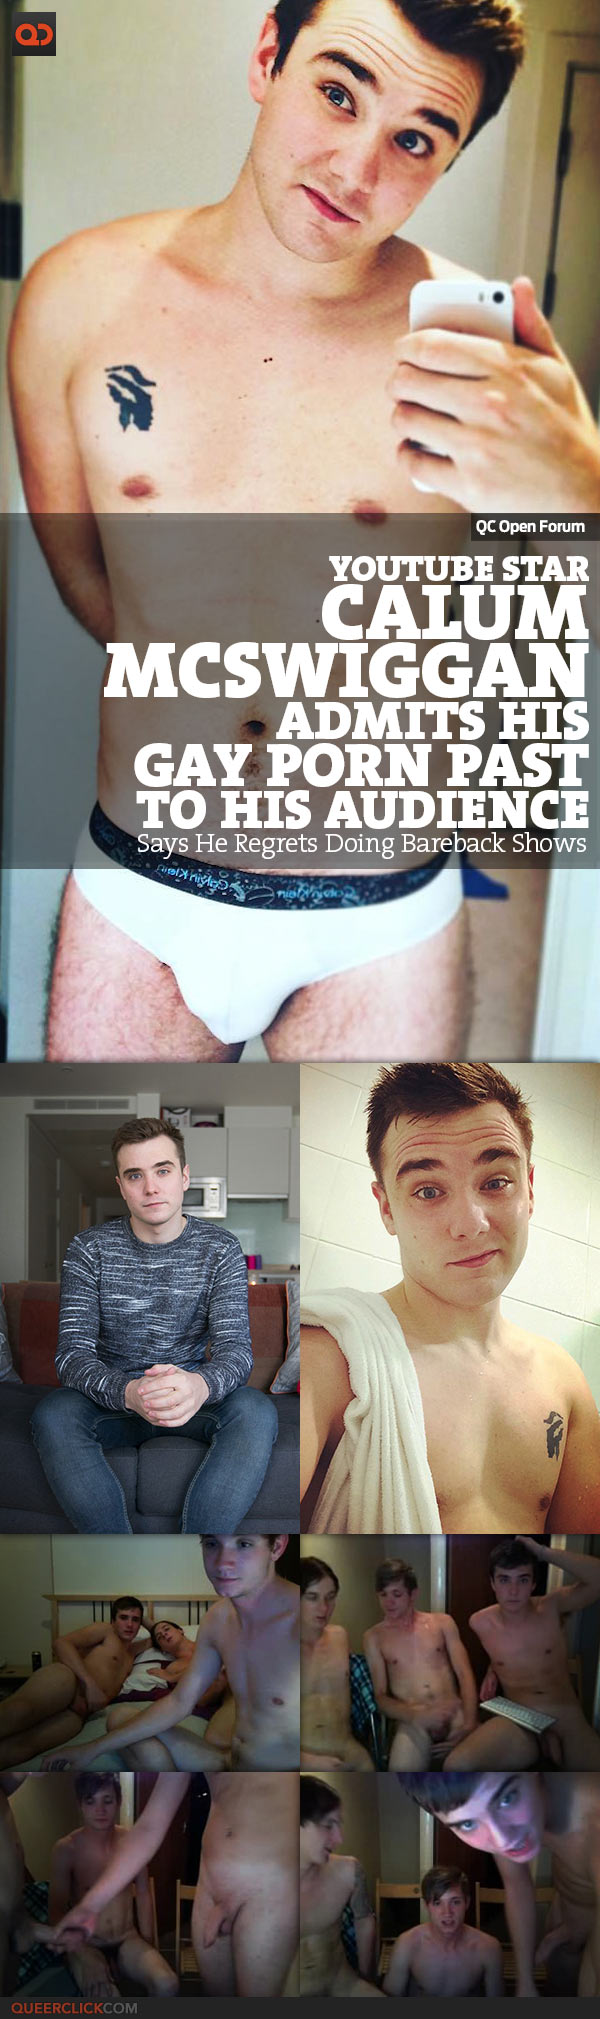 QC Open Forum: YouTube Star Calum McSwiggan Admits His Gay Porn Past To His Audience, Says He Regrets Doing Bareback Shows